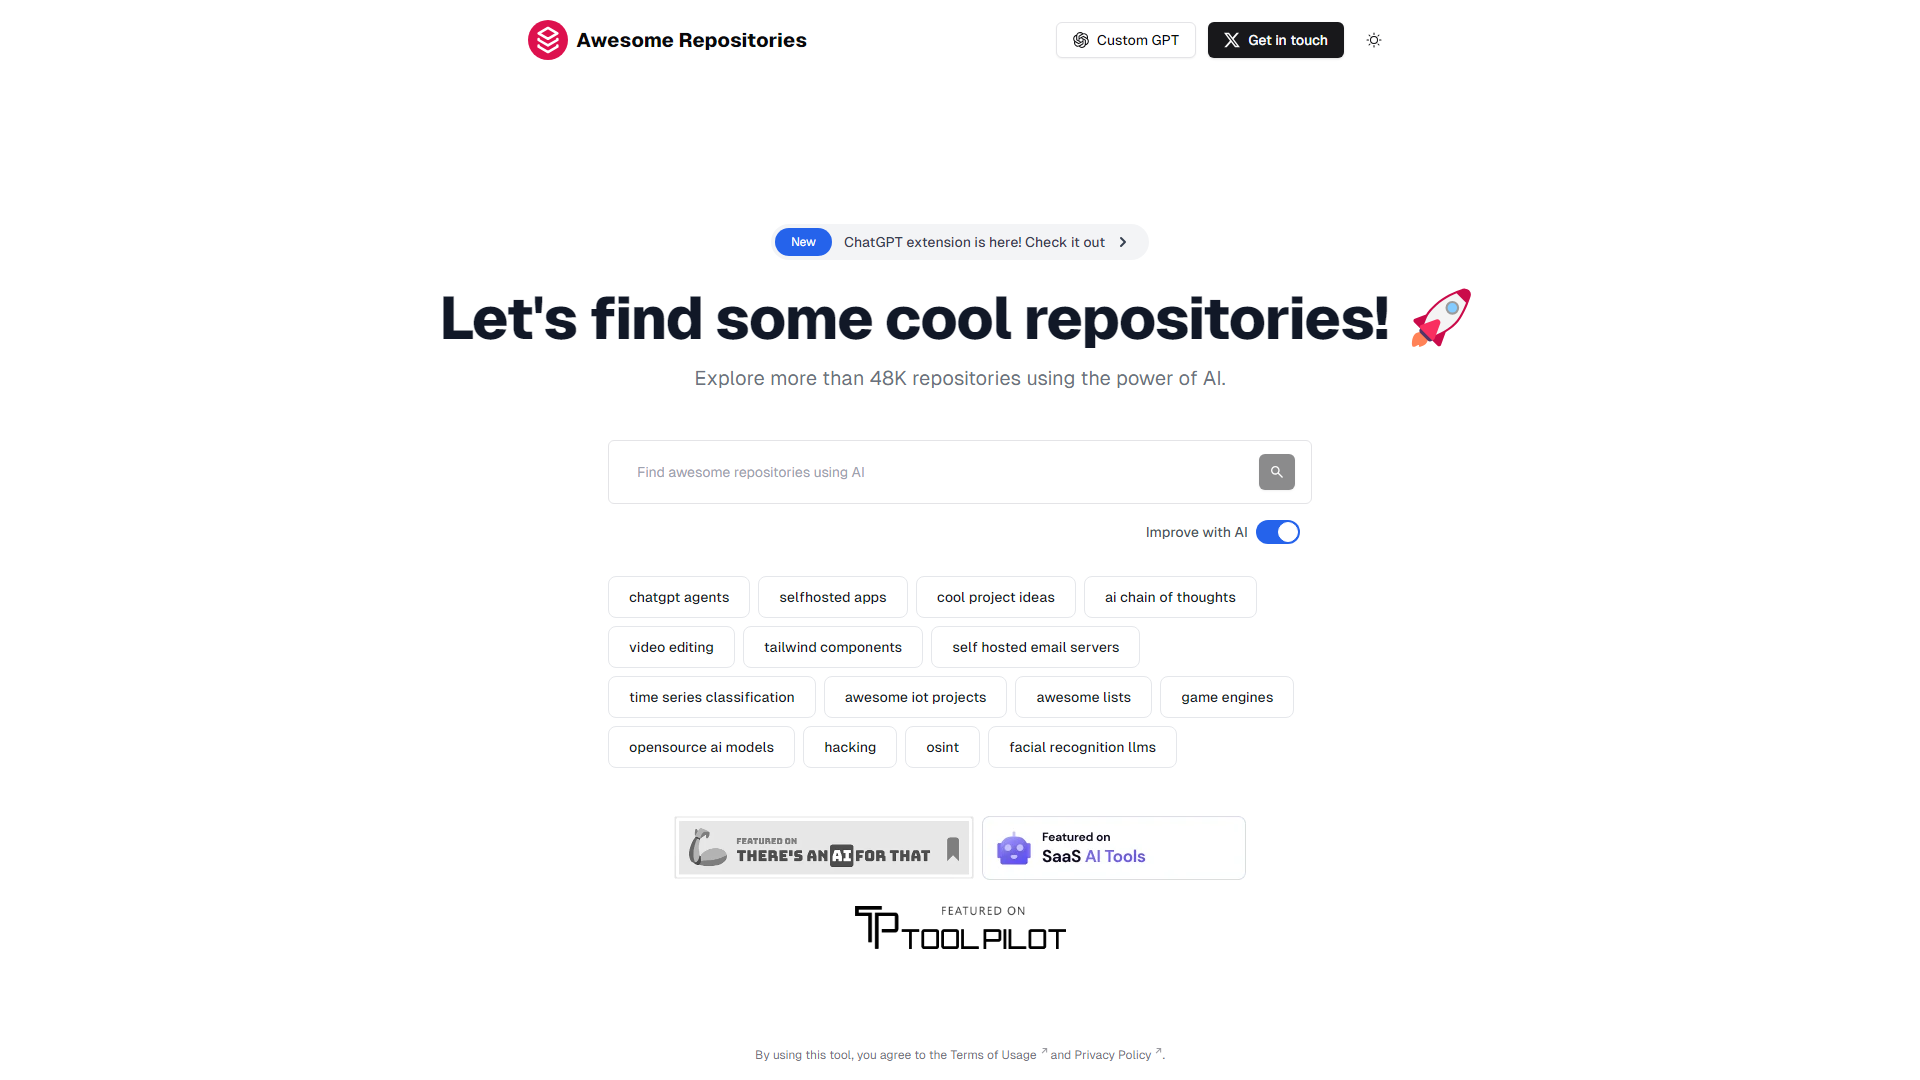 Awesome Repositories